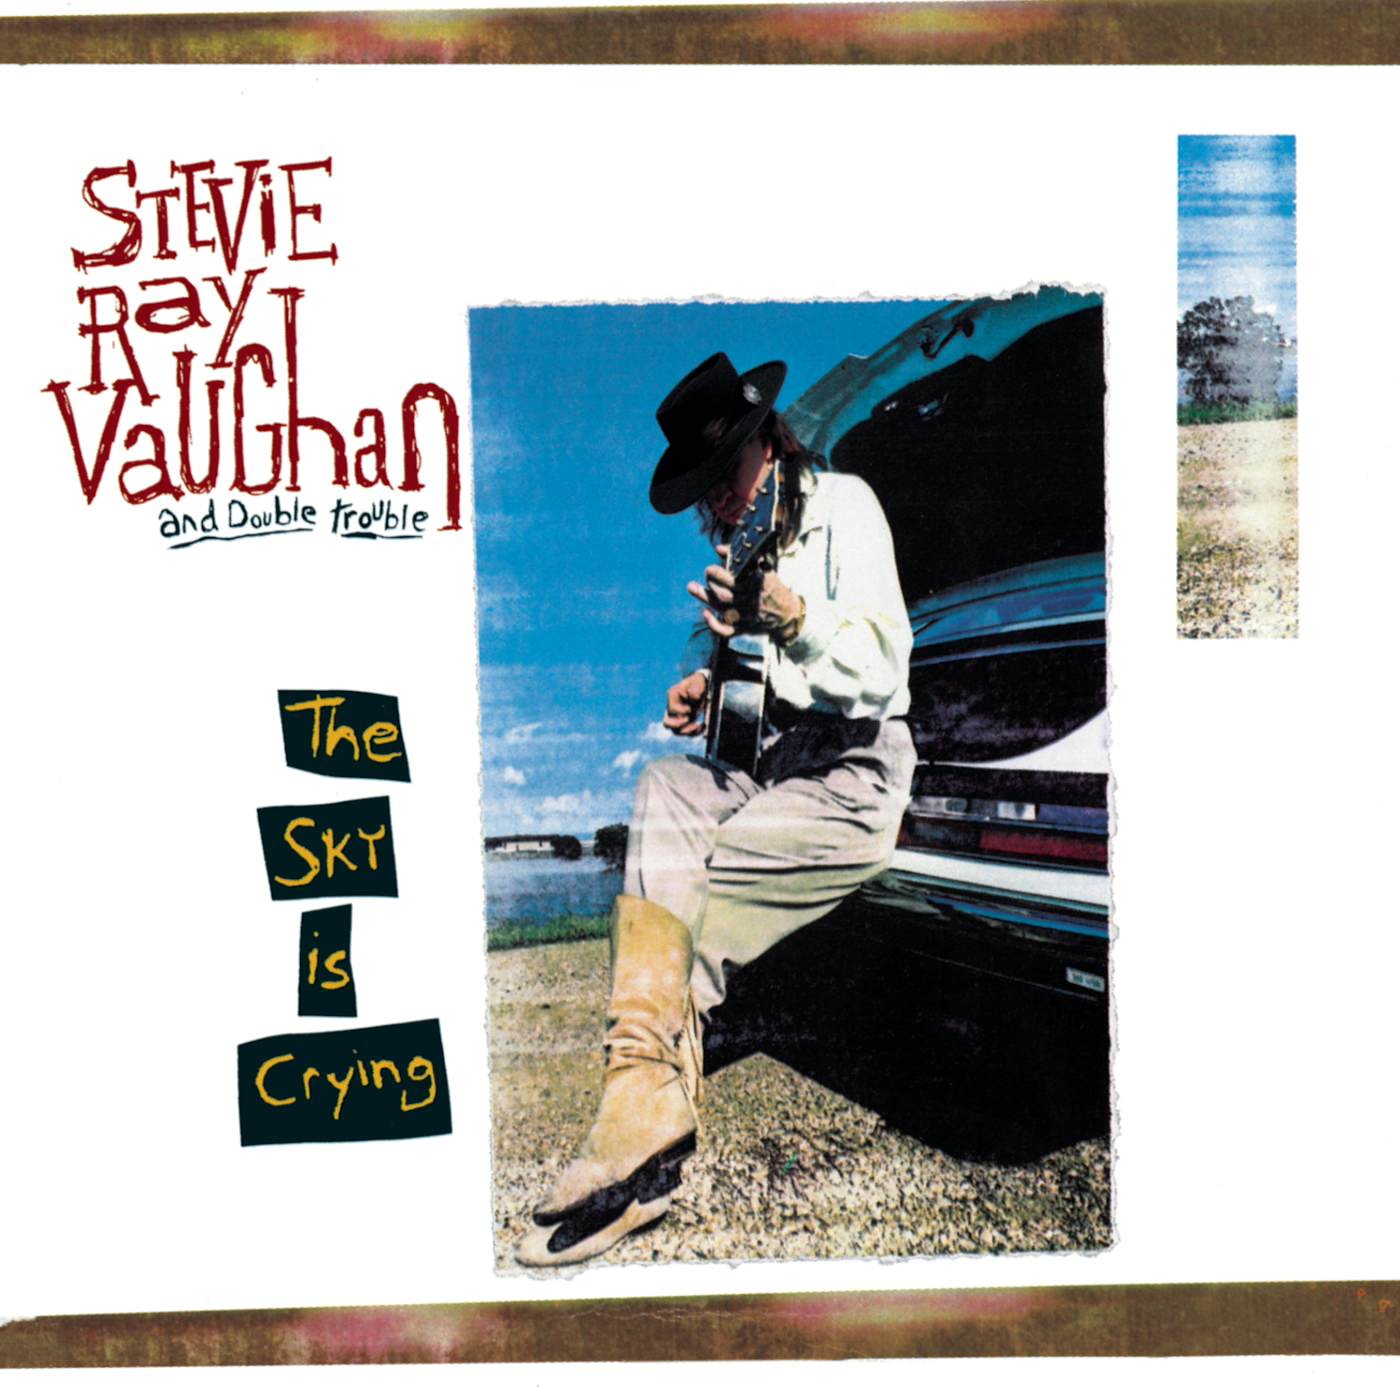 Stevie Ray Vaughan SKY IS CRYING CD